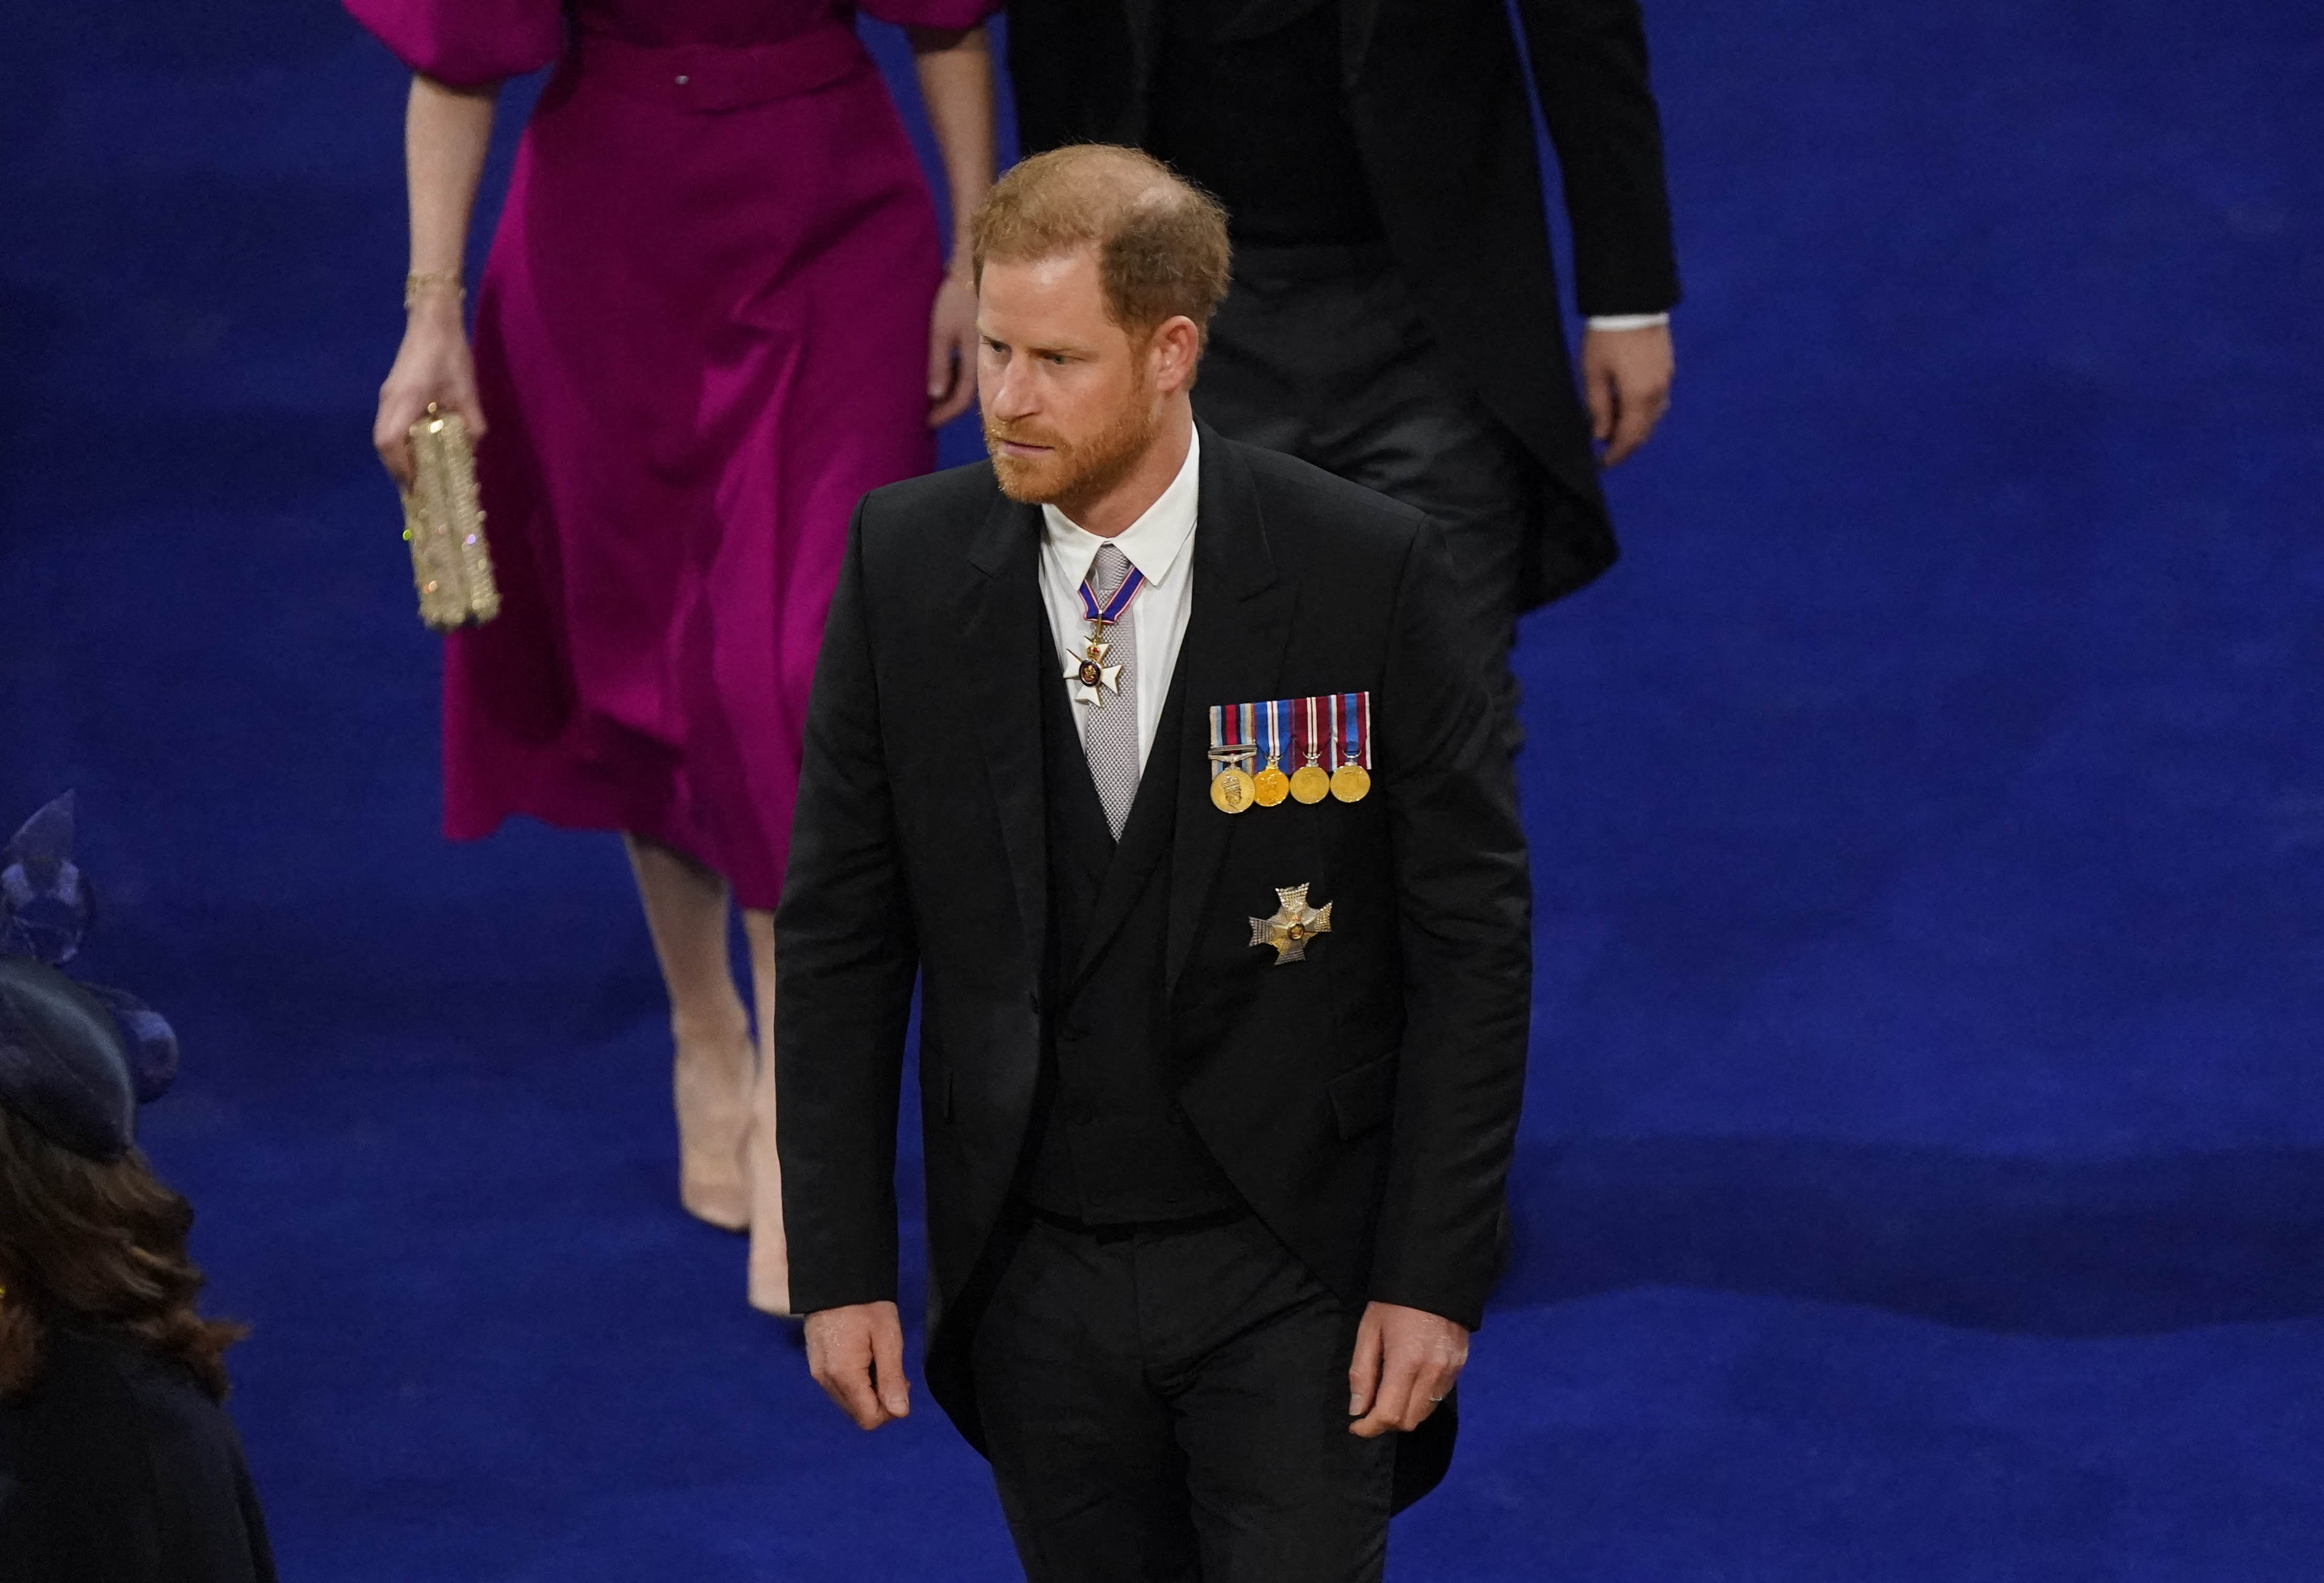 Prince Harry, the youngest son of King Charles (who has stepped down from the royal family), attended the ceremony without his wife Meghan Markle and children.